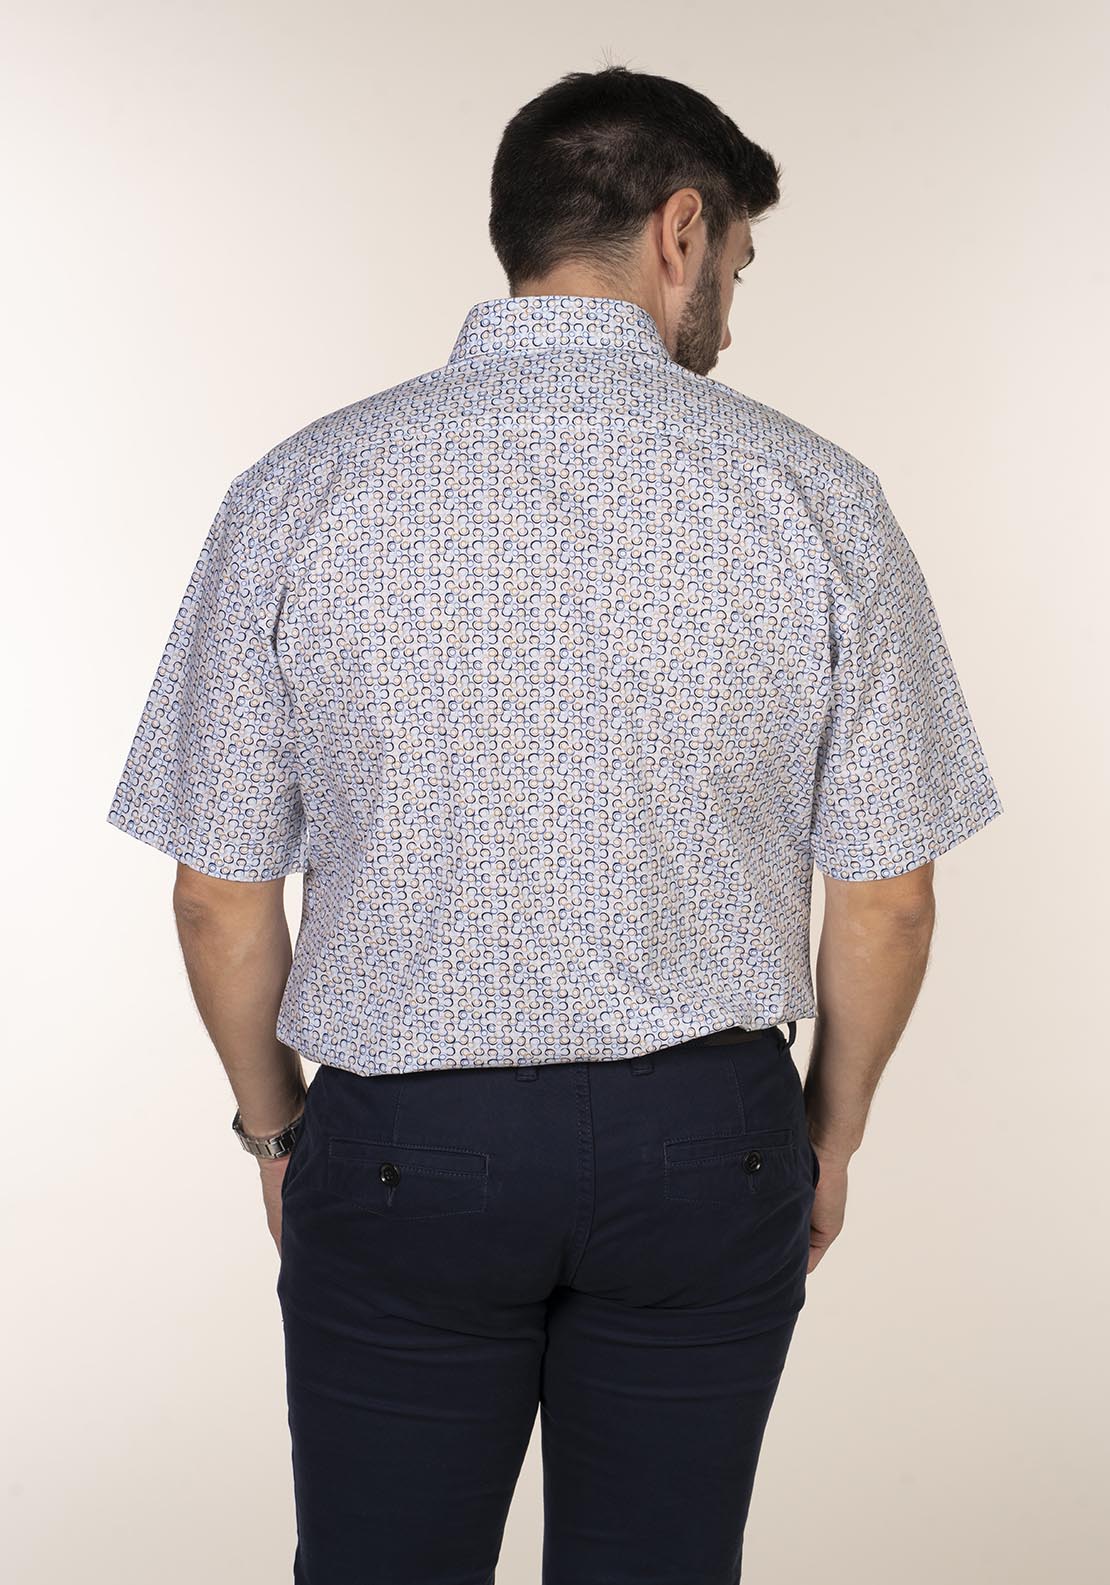 Yeats Casual Patterned Short Sleeve Shirt - Blue / Beige 4 Shaws Department Stores